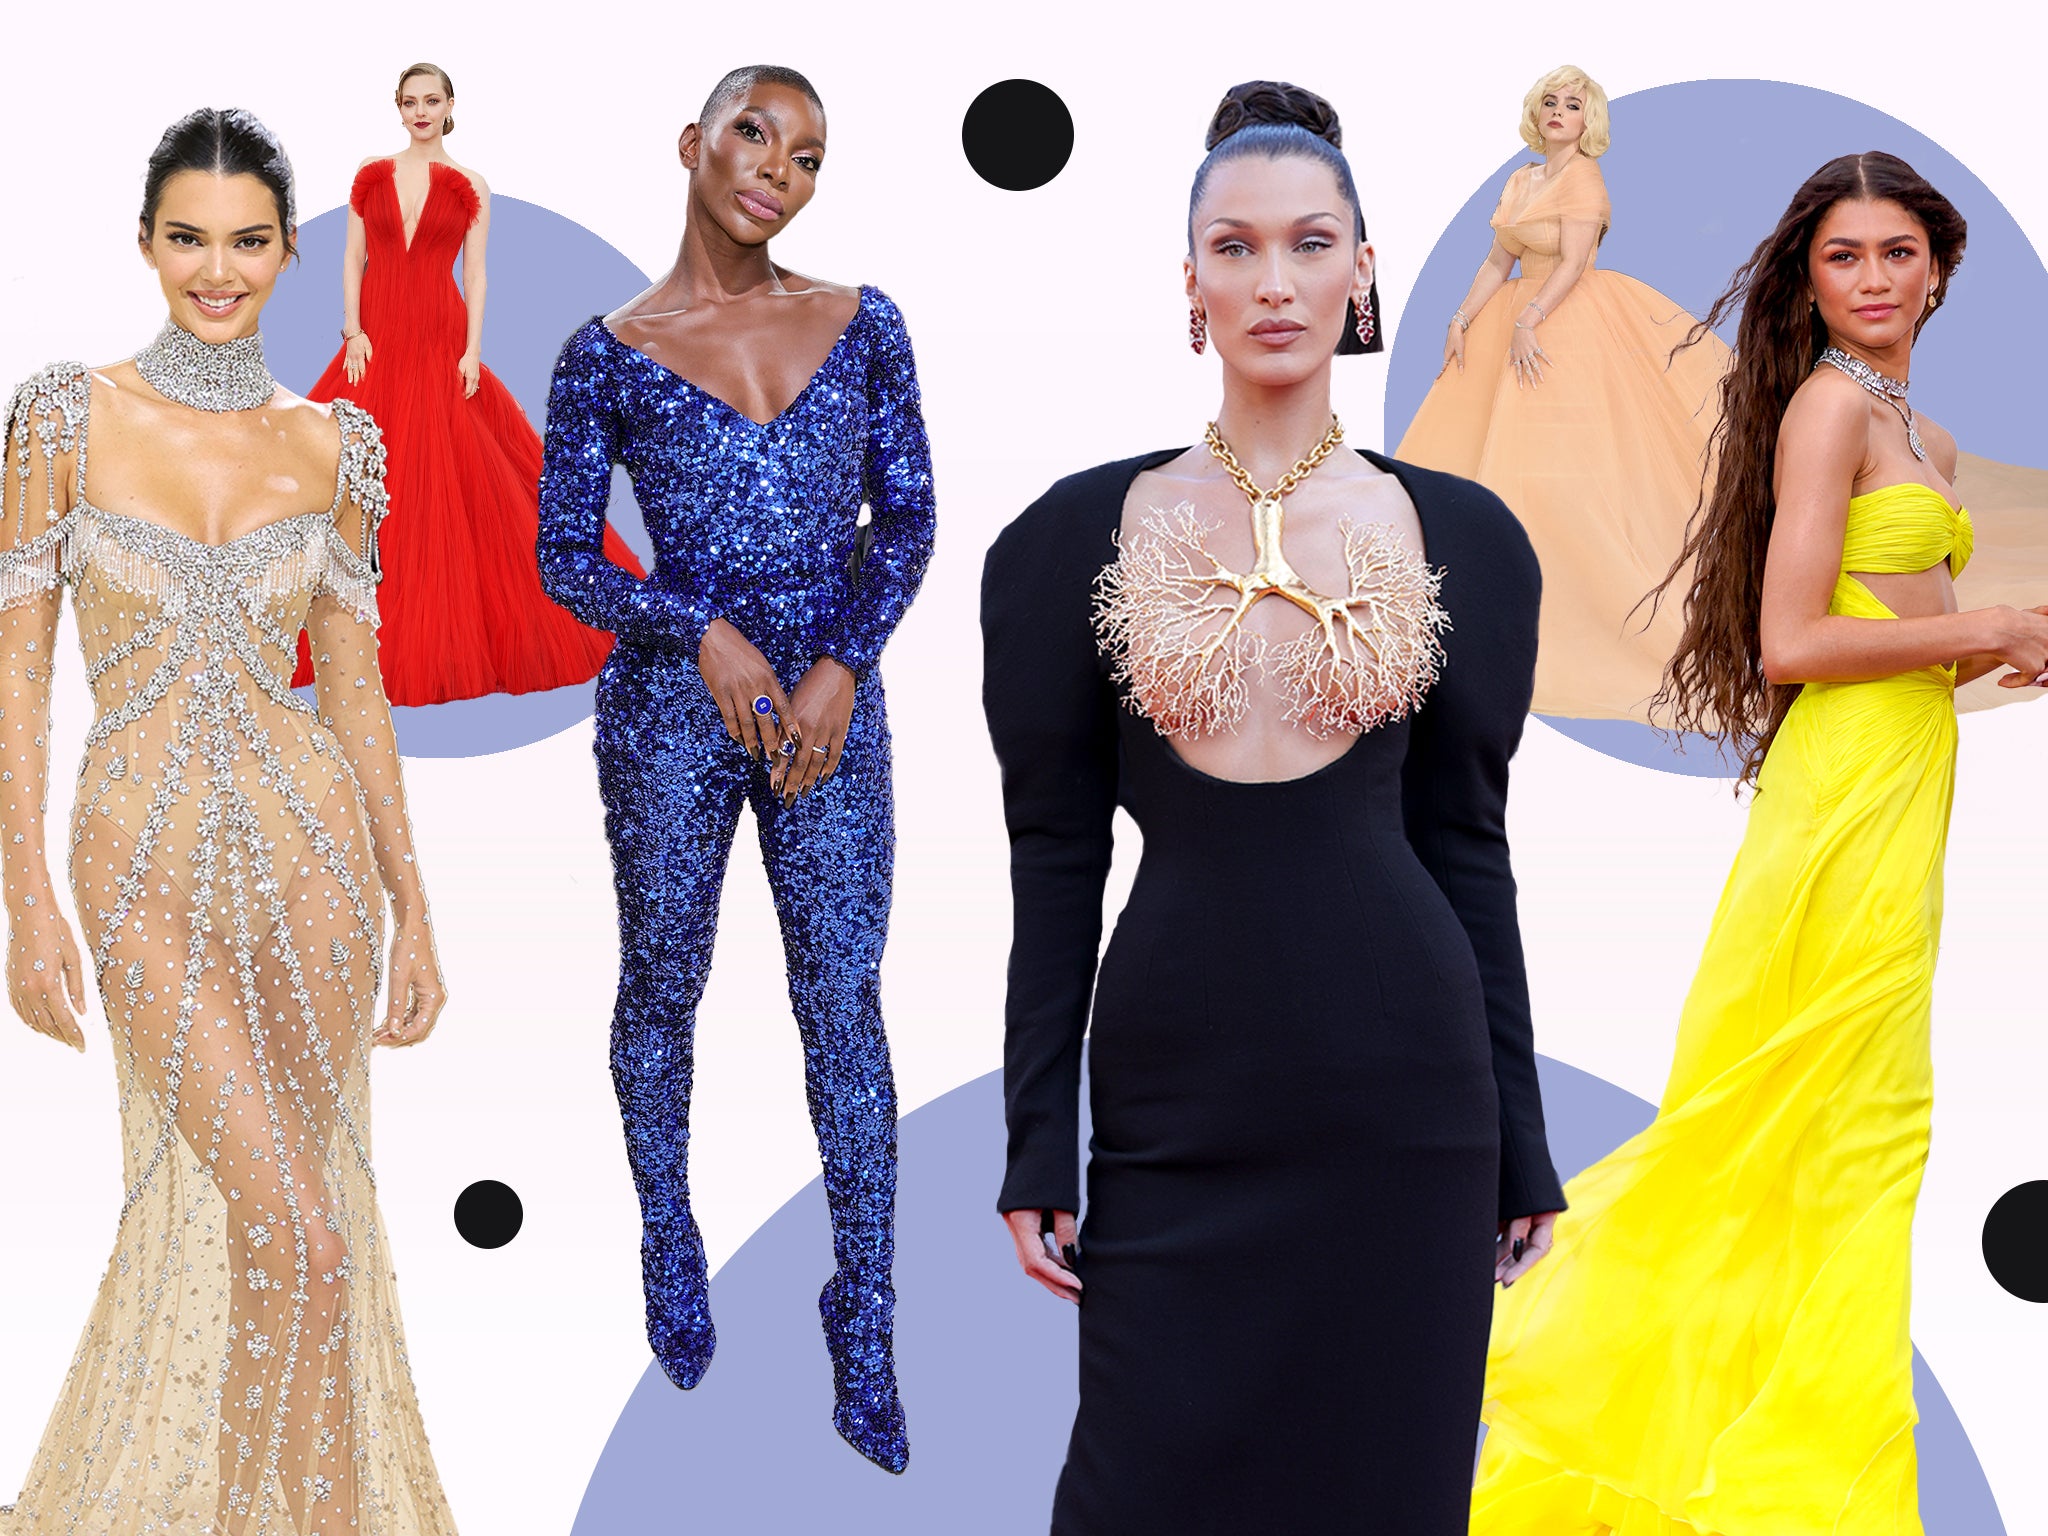 When it came to outfits, there were plenty of standout moments